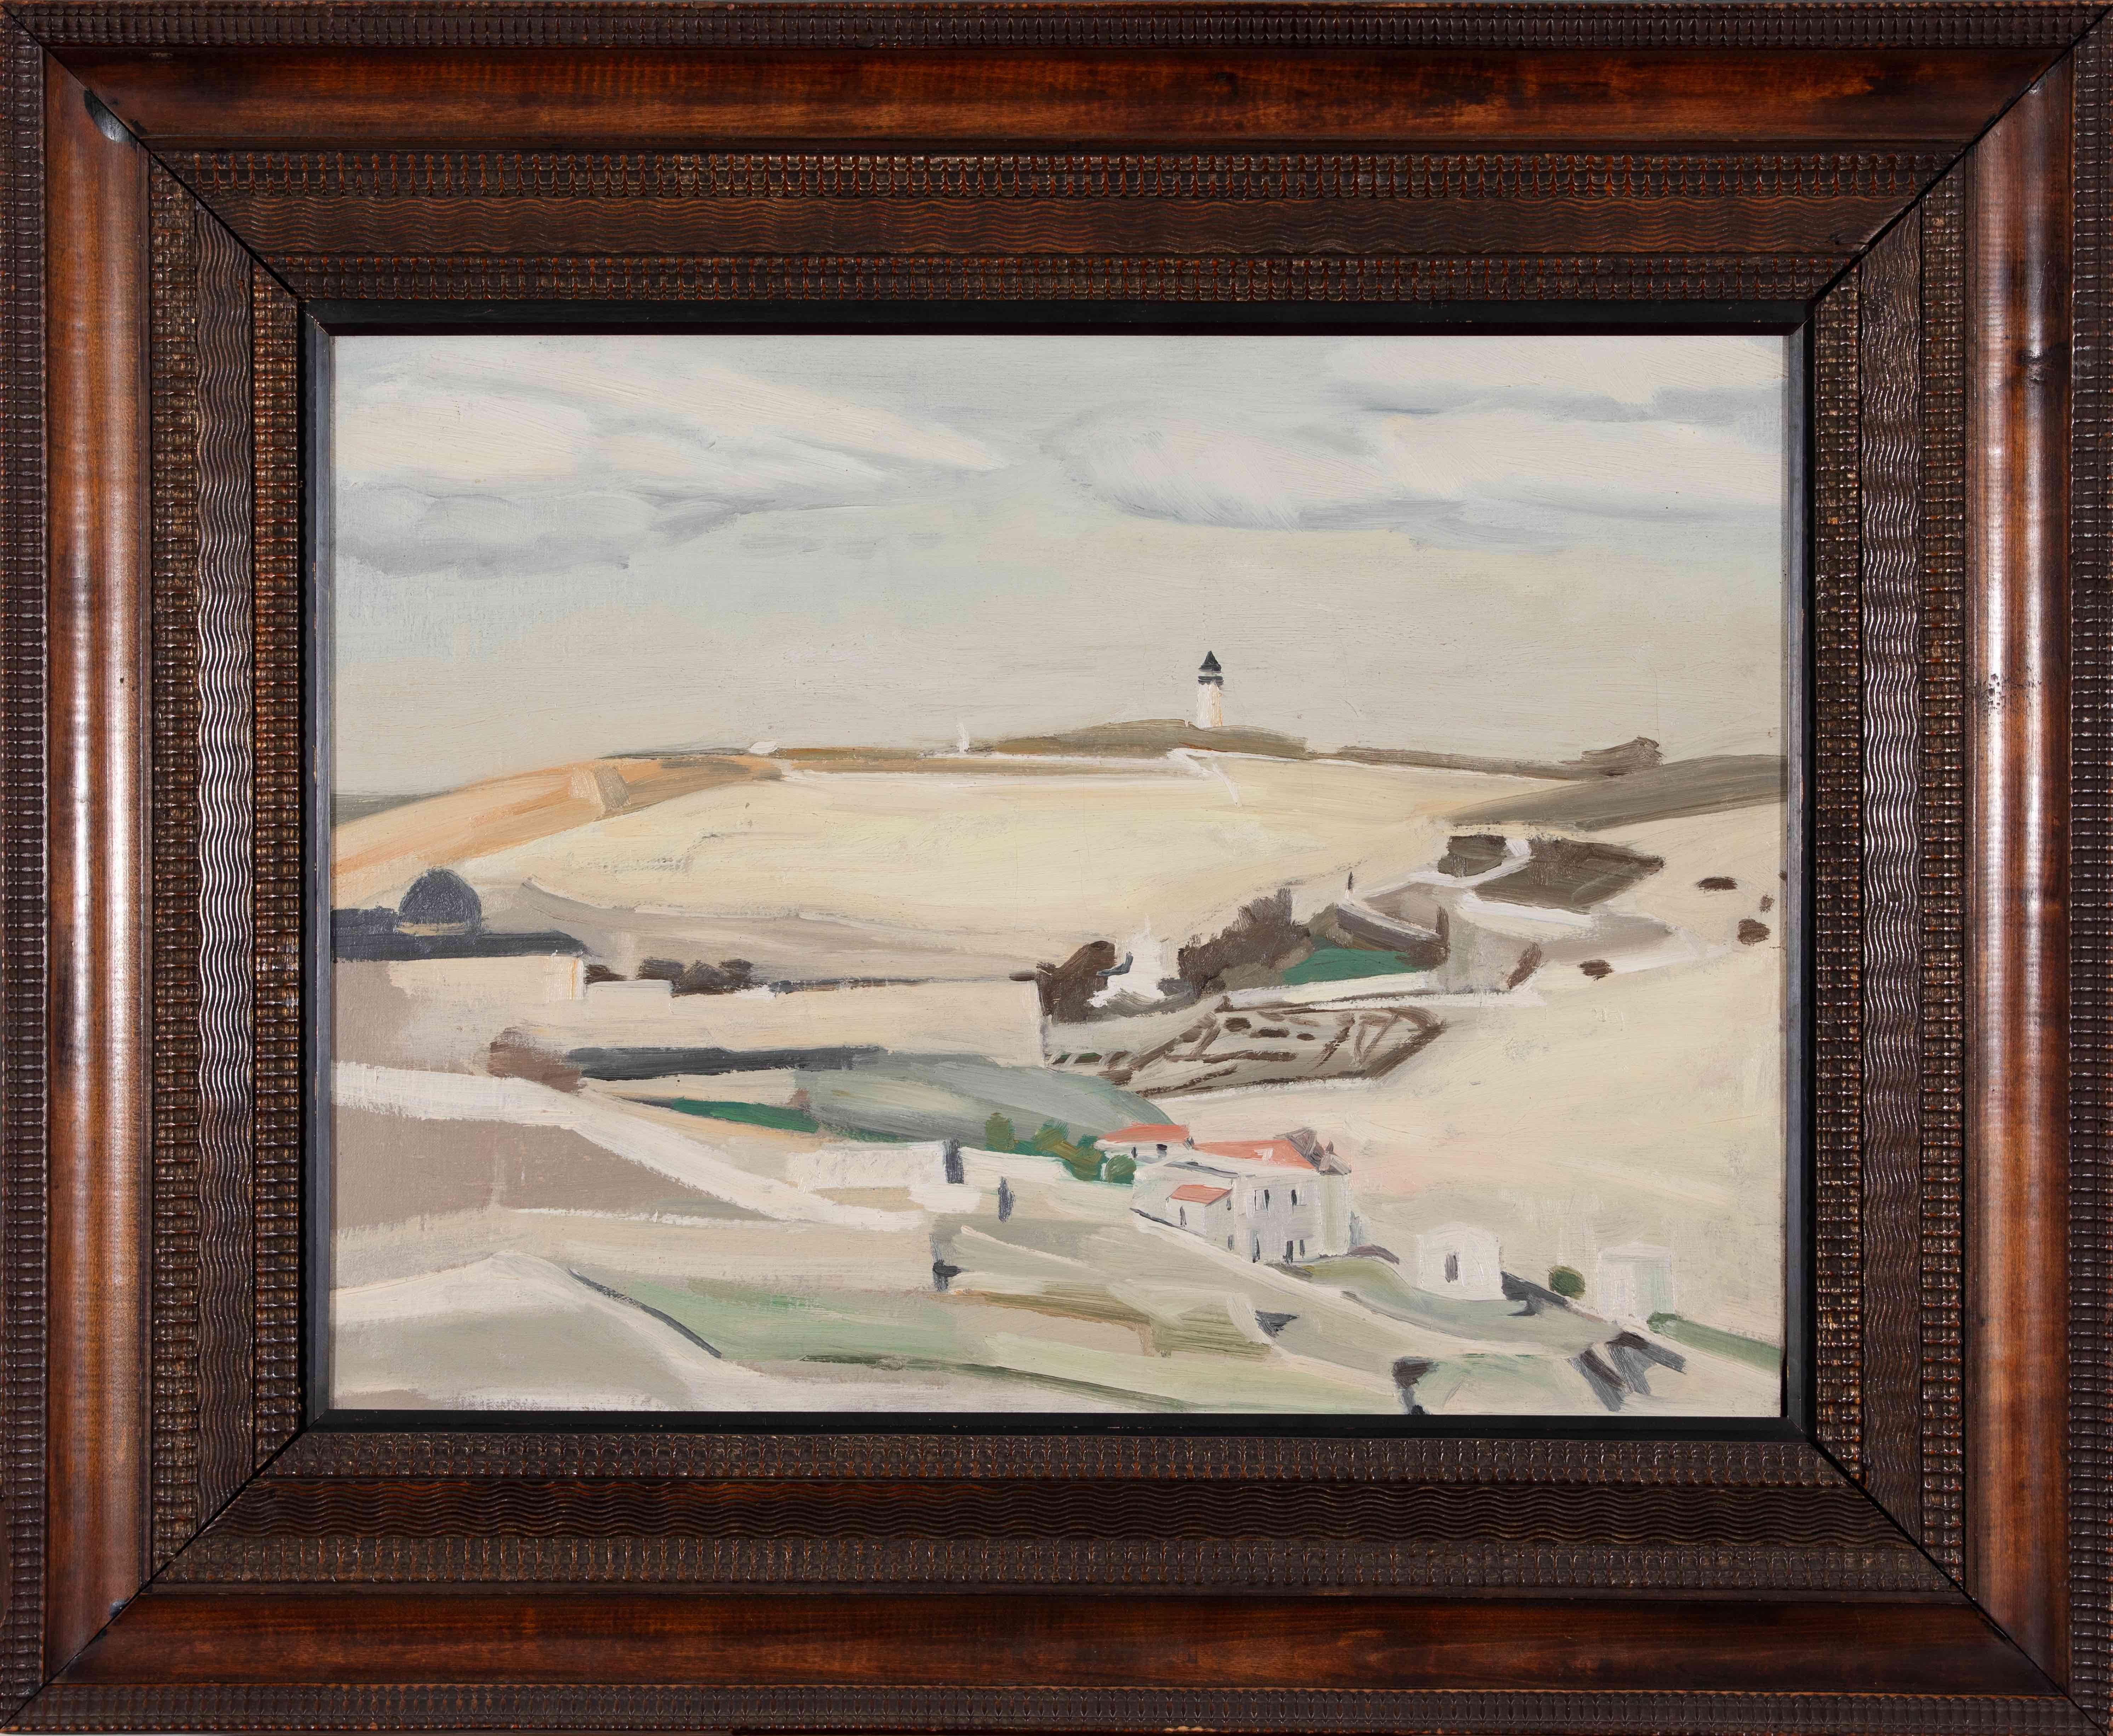 Mount Scopus and Government House by David Bomberg - Landscape painting For Sale 1